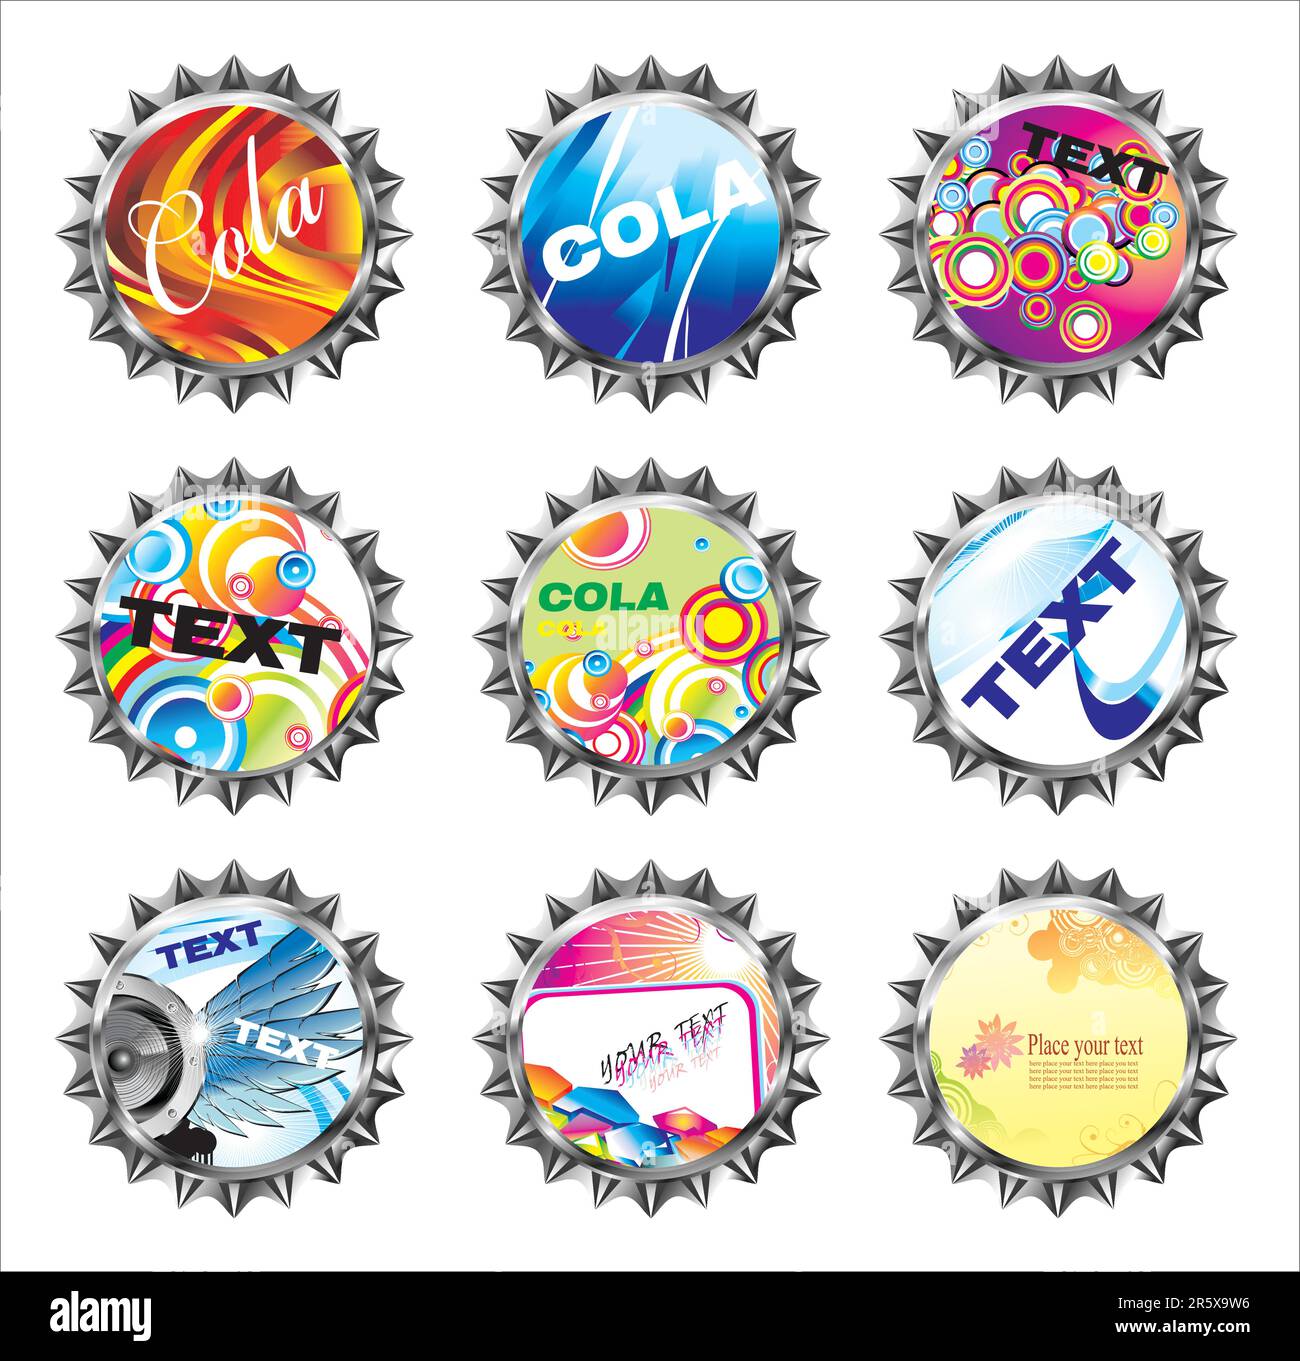 Little collections of bottle caps with various colorful designs Stock Vector